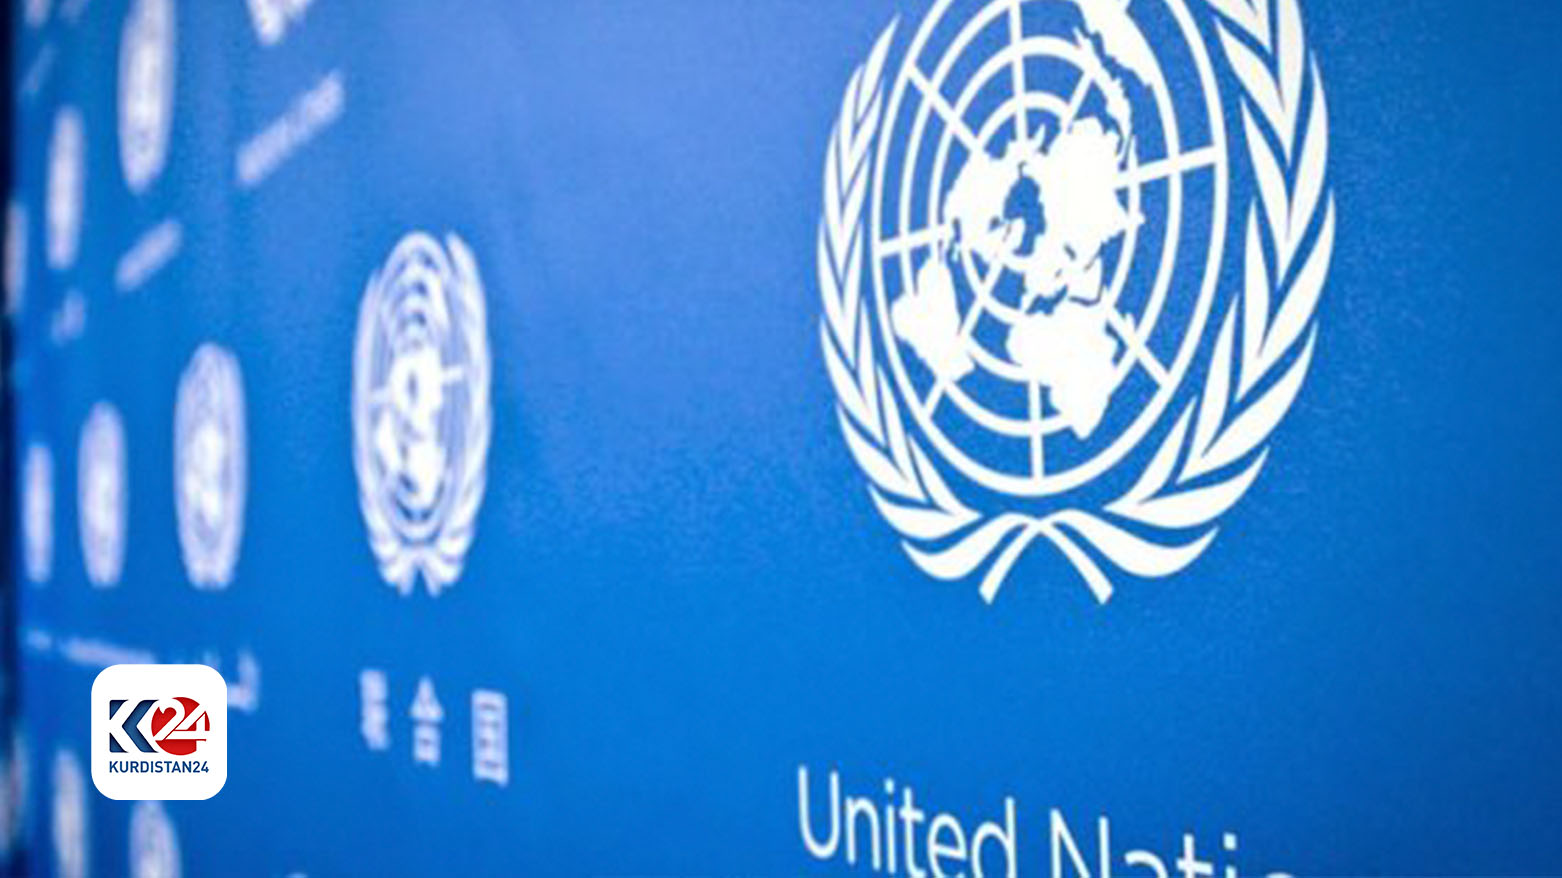 UN logo pattern a background at the United Nations headquarters. (Photo: AP)